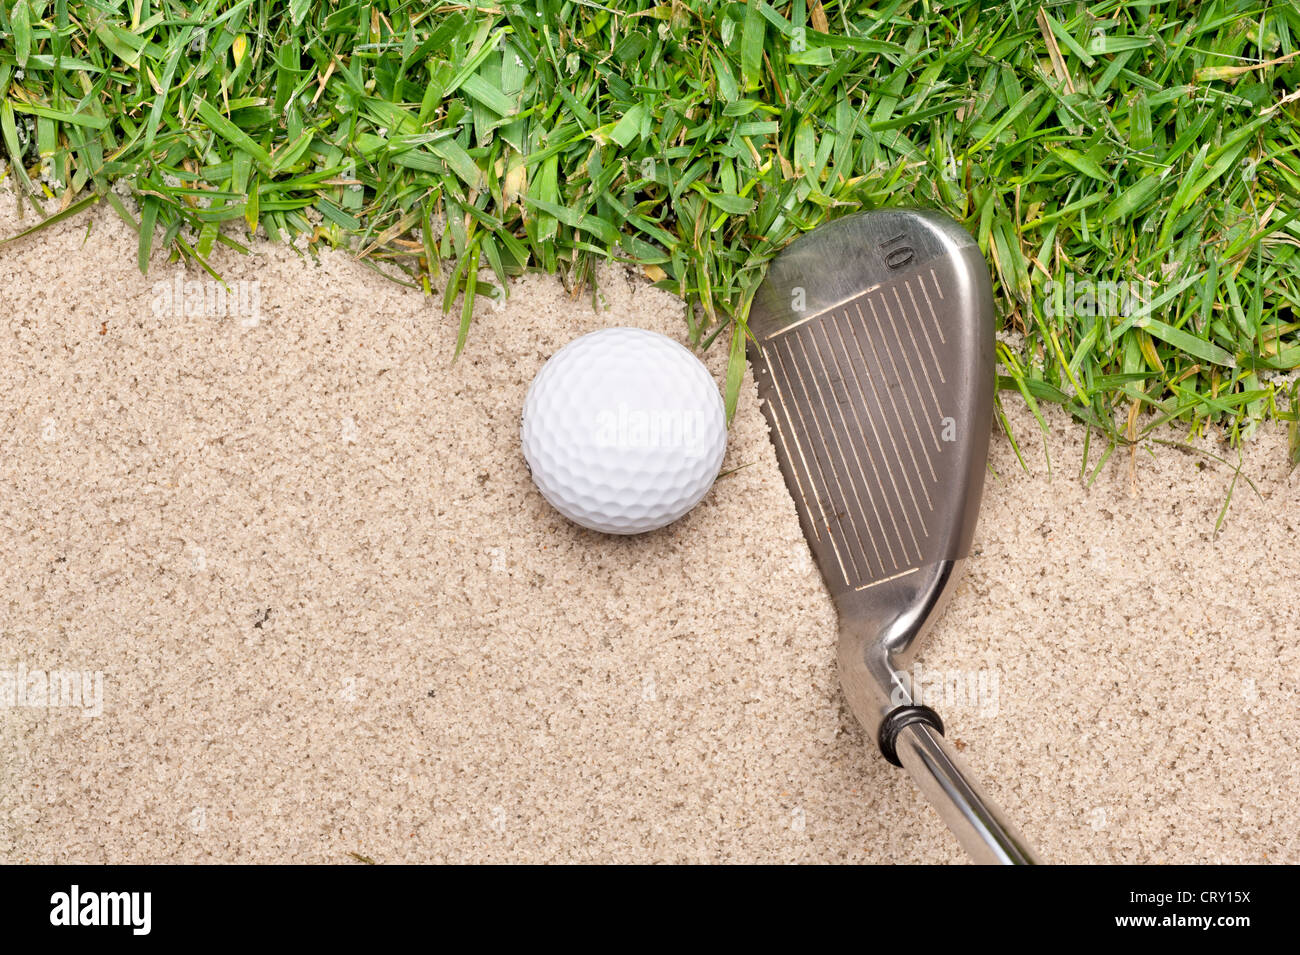 A golf ball in a sand trap getting ready to be hit with an iron. Stock Photo